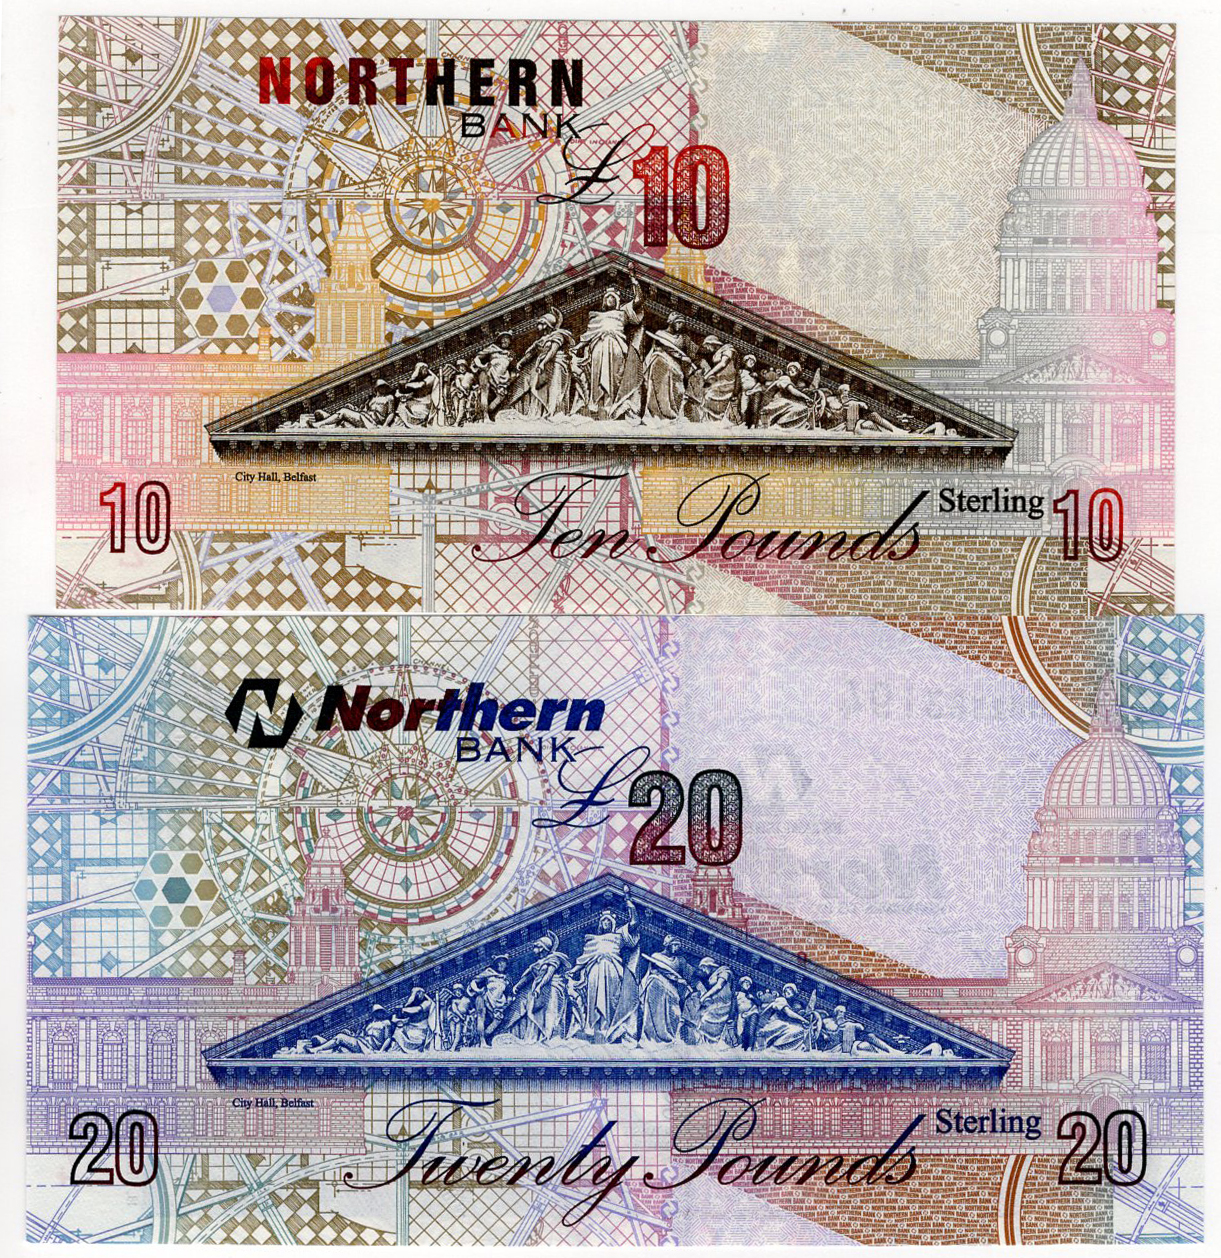 Northern Ireland, Northern Bank (2), 20 Pounds dated 6th November 2006 serial HH2583194 (PMI - Image 2 of 2